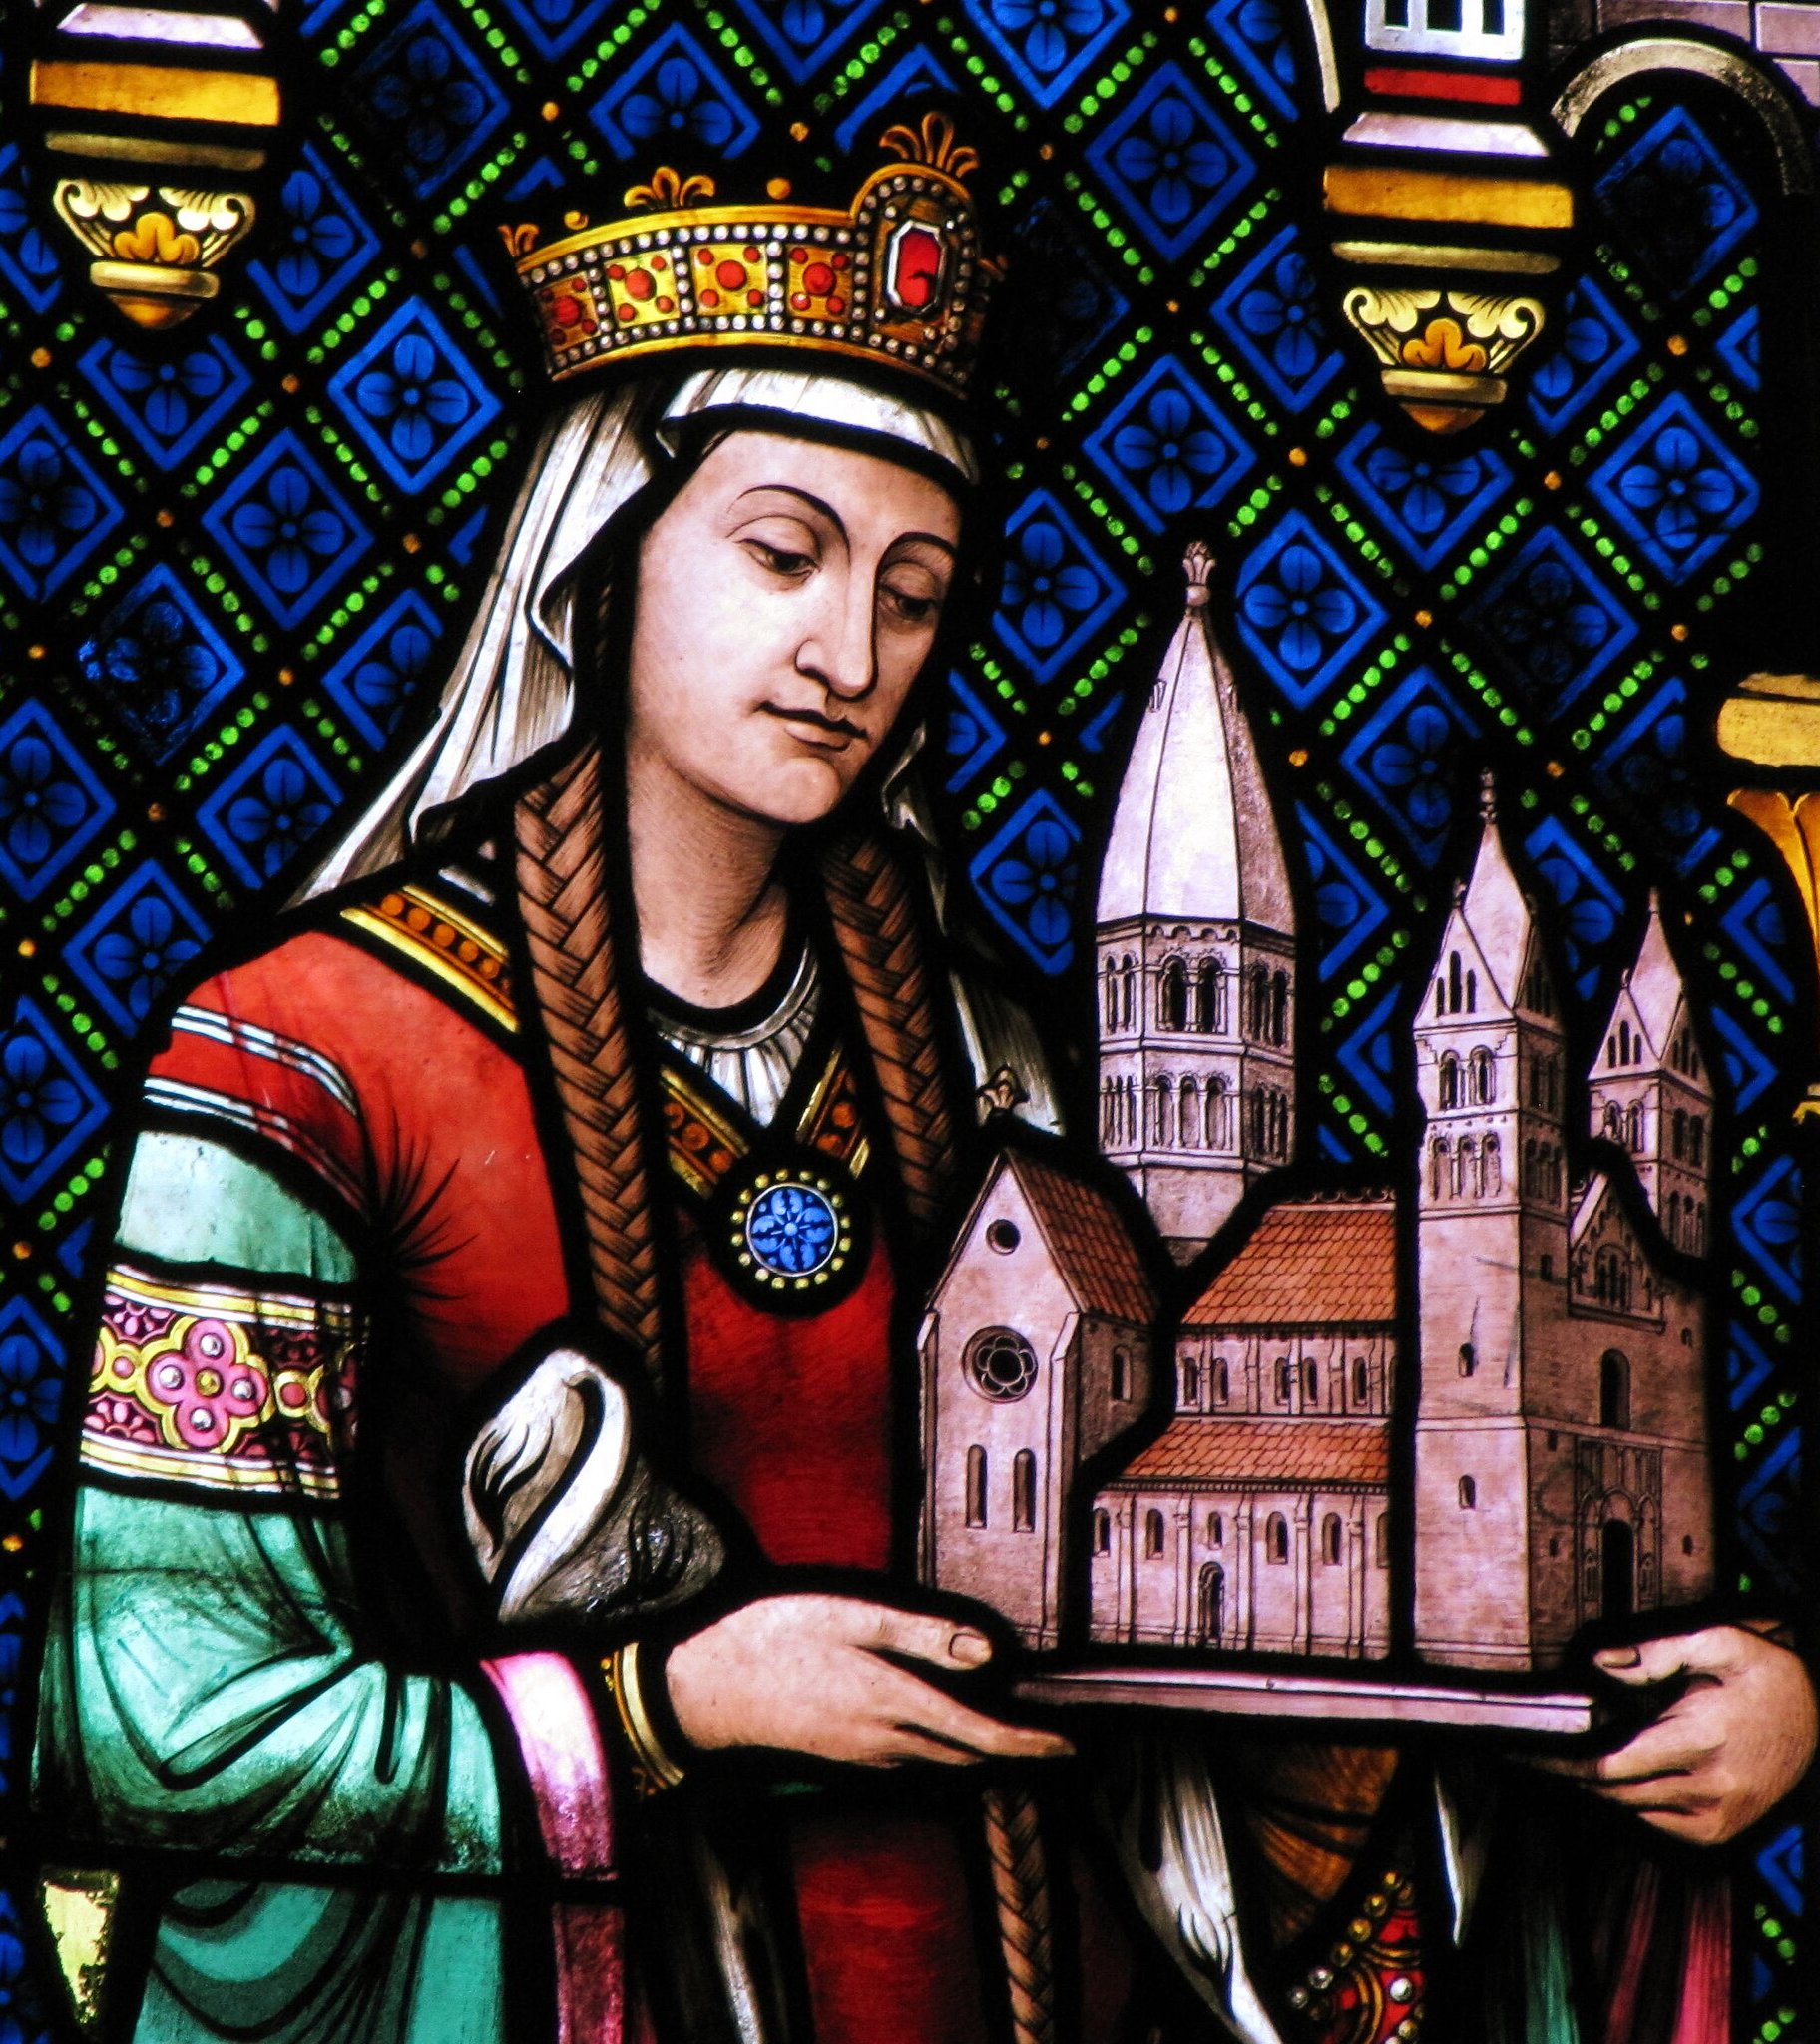 A stained glass portrait of Hildegard of Bingen at the Ste Foy Church in Conques, France. The image shows Hildegard as a serene, crowned figure, wearing a richly decorated red and green robe with a blue circular jewel at the center. She holds a model of a monastery, indicative of her role as a founder and leader of a religious community. The background features a blue, geometric pattern with fleur-de-lis motifs and elements of heraldry. The intricate details and vibrant colors of the stained glass illuminate her importance and veneration as a saint and a significant figure in the church. Her composed expression and the symbolic representation highlight her contributions to religious life and her status within the church.